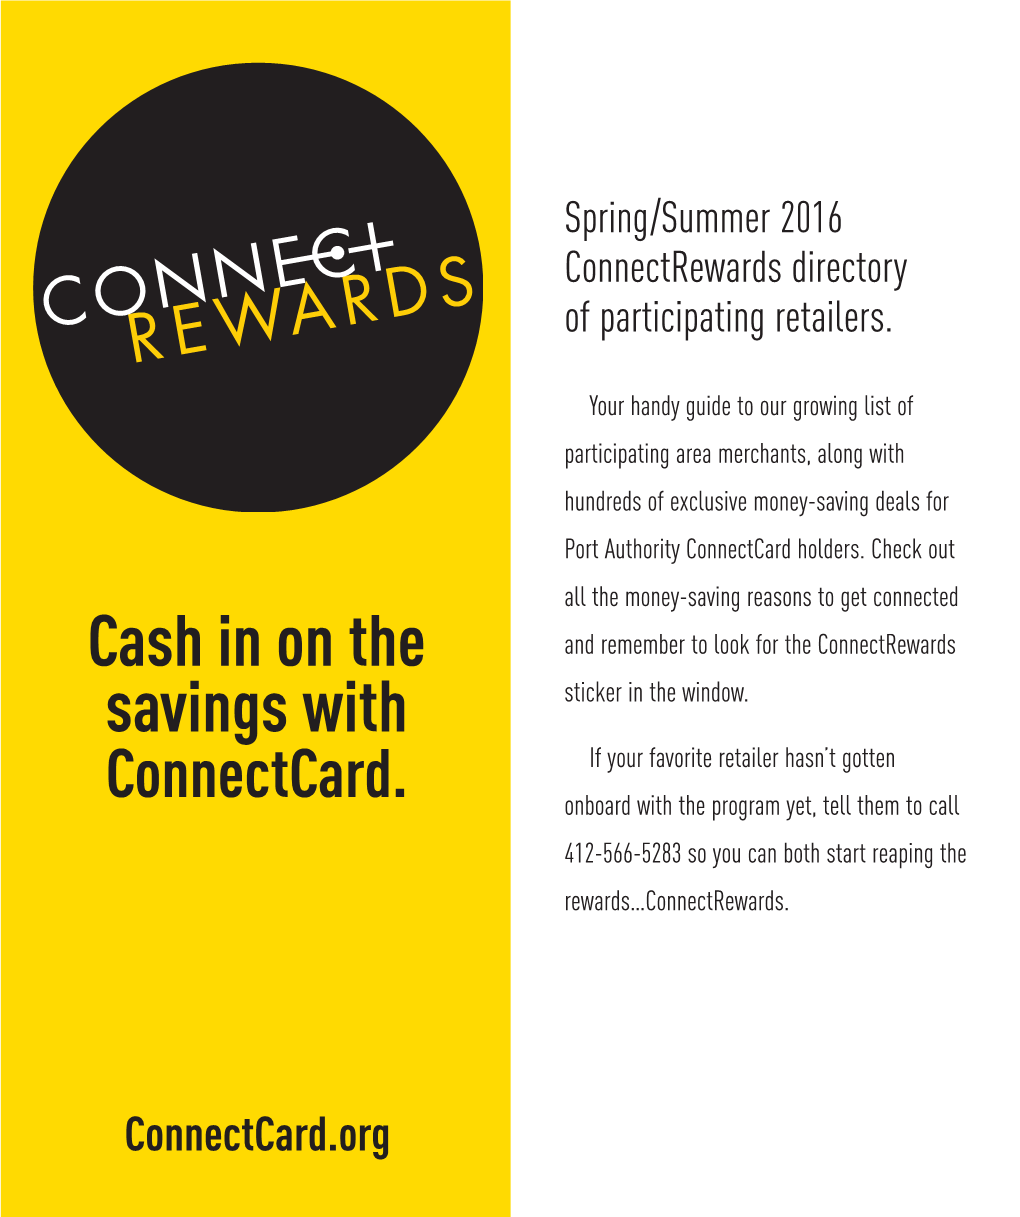 Cash in on the Savings With